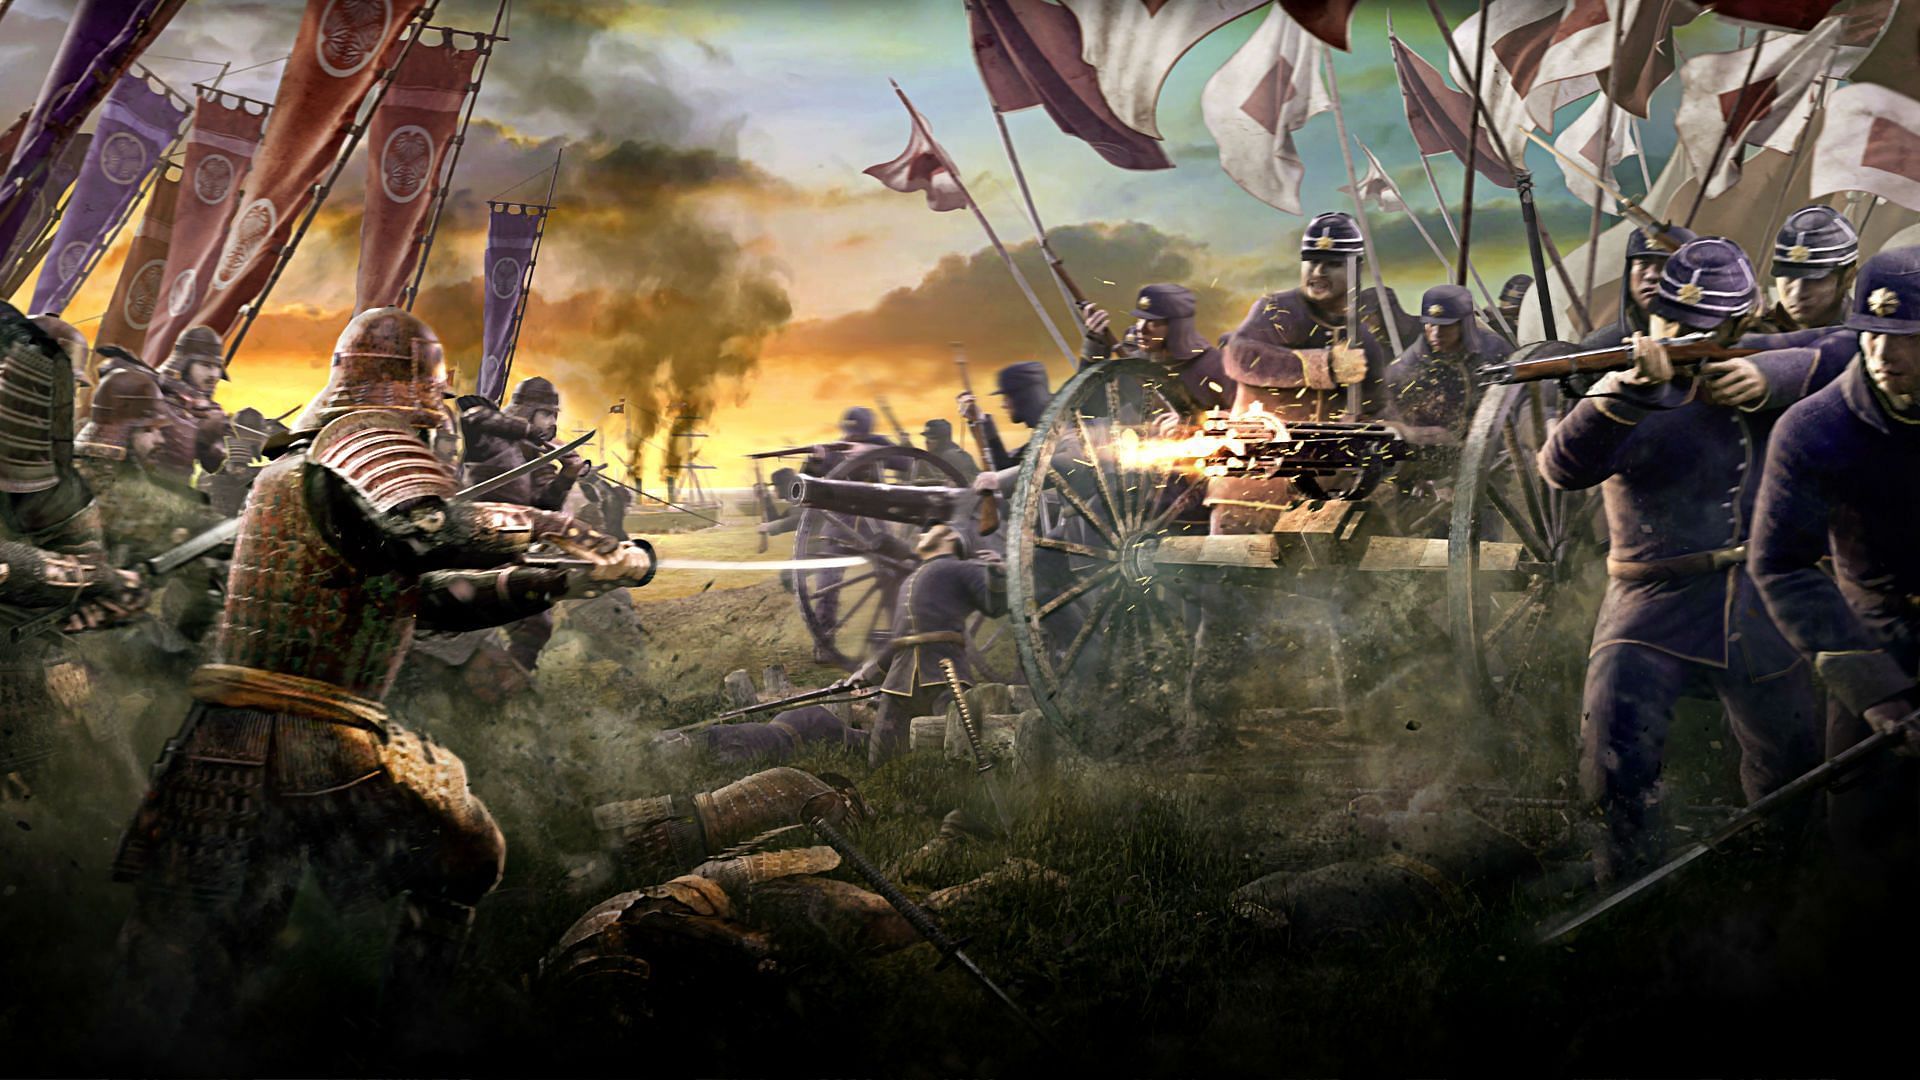 Create Clans, slash enemies, in this turn based strategic game (Image via Creative Assembly)